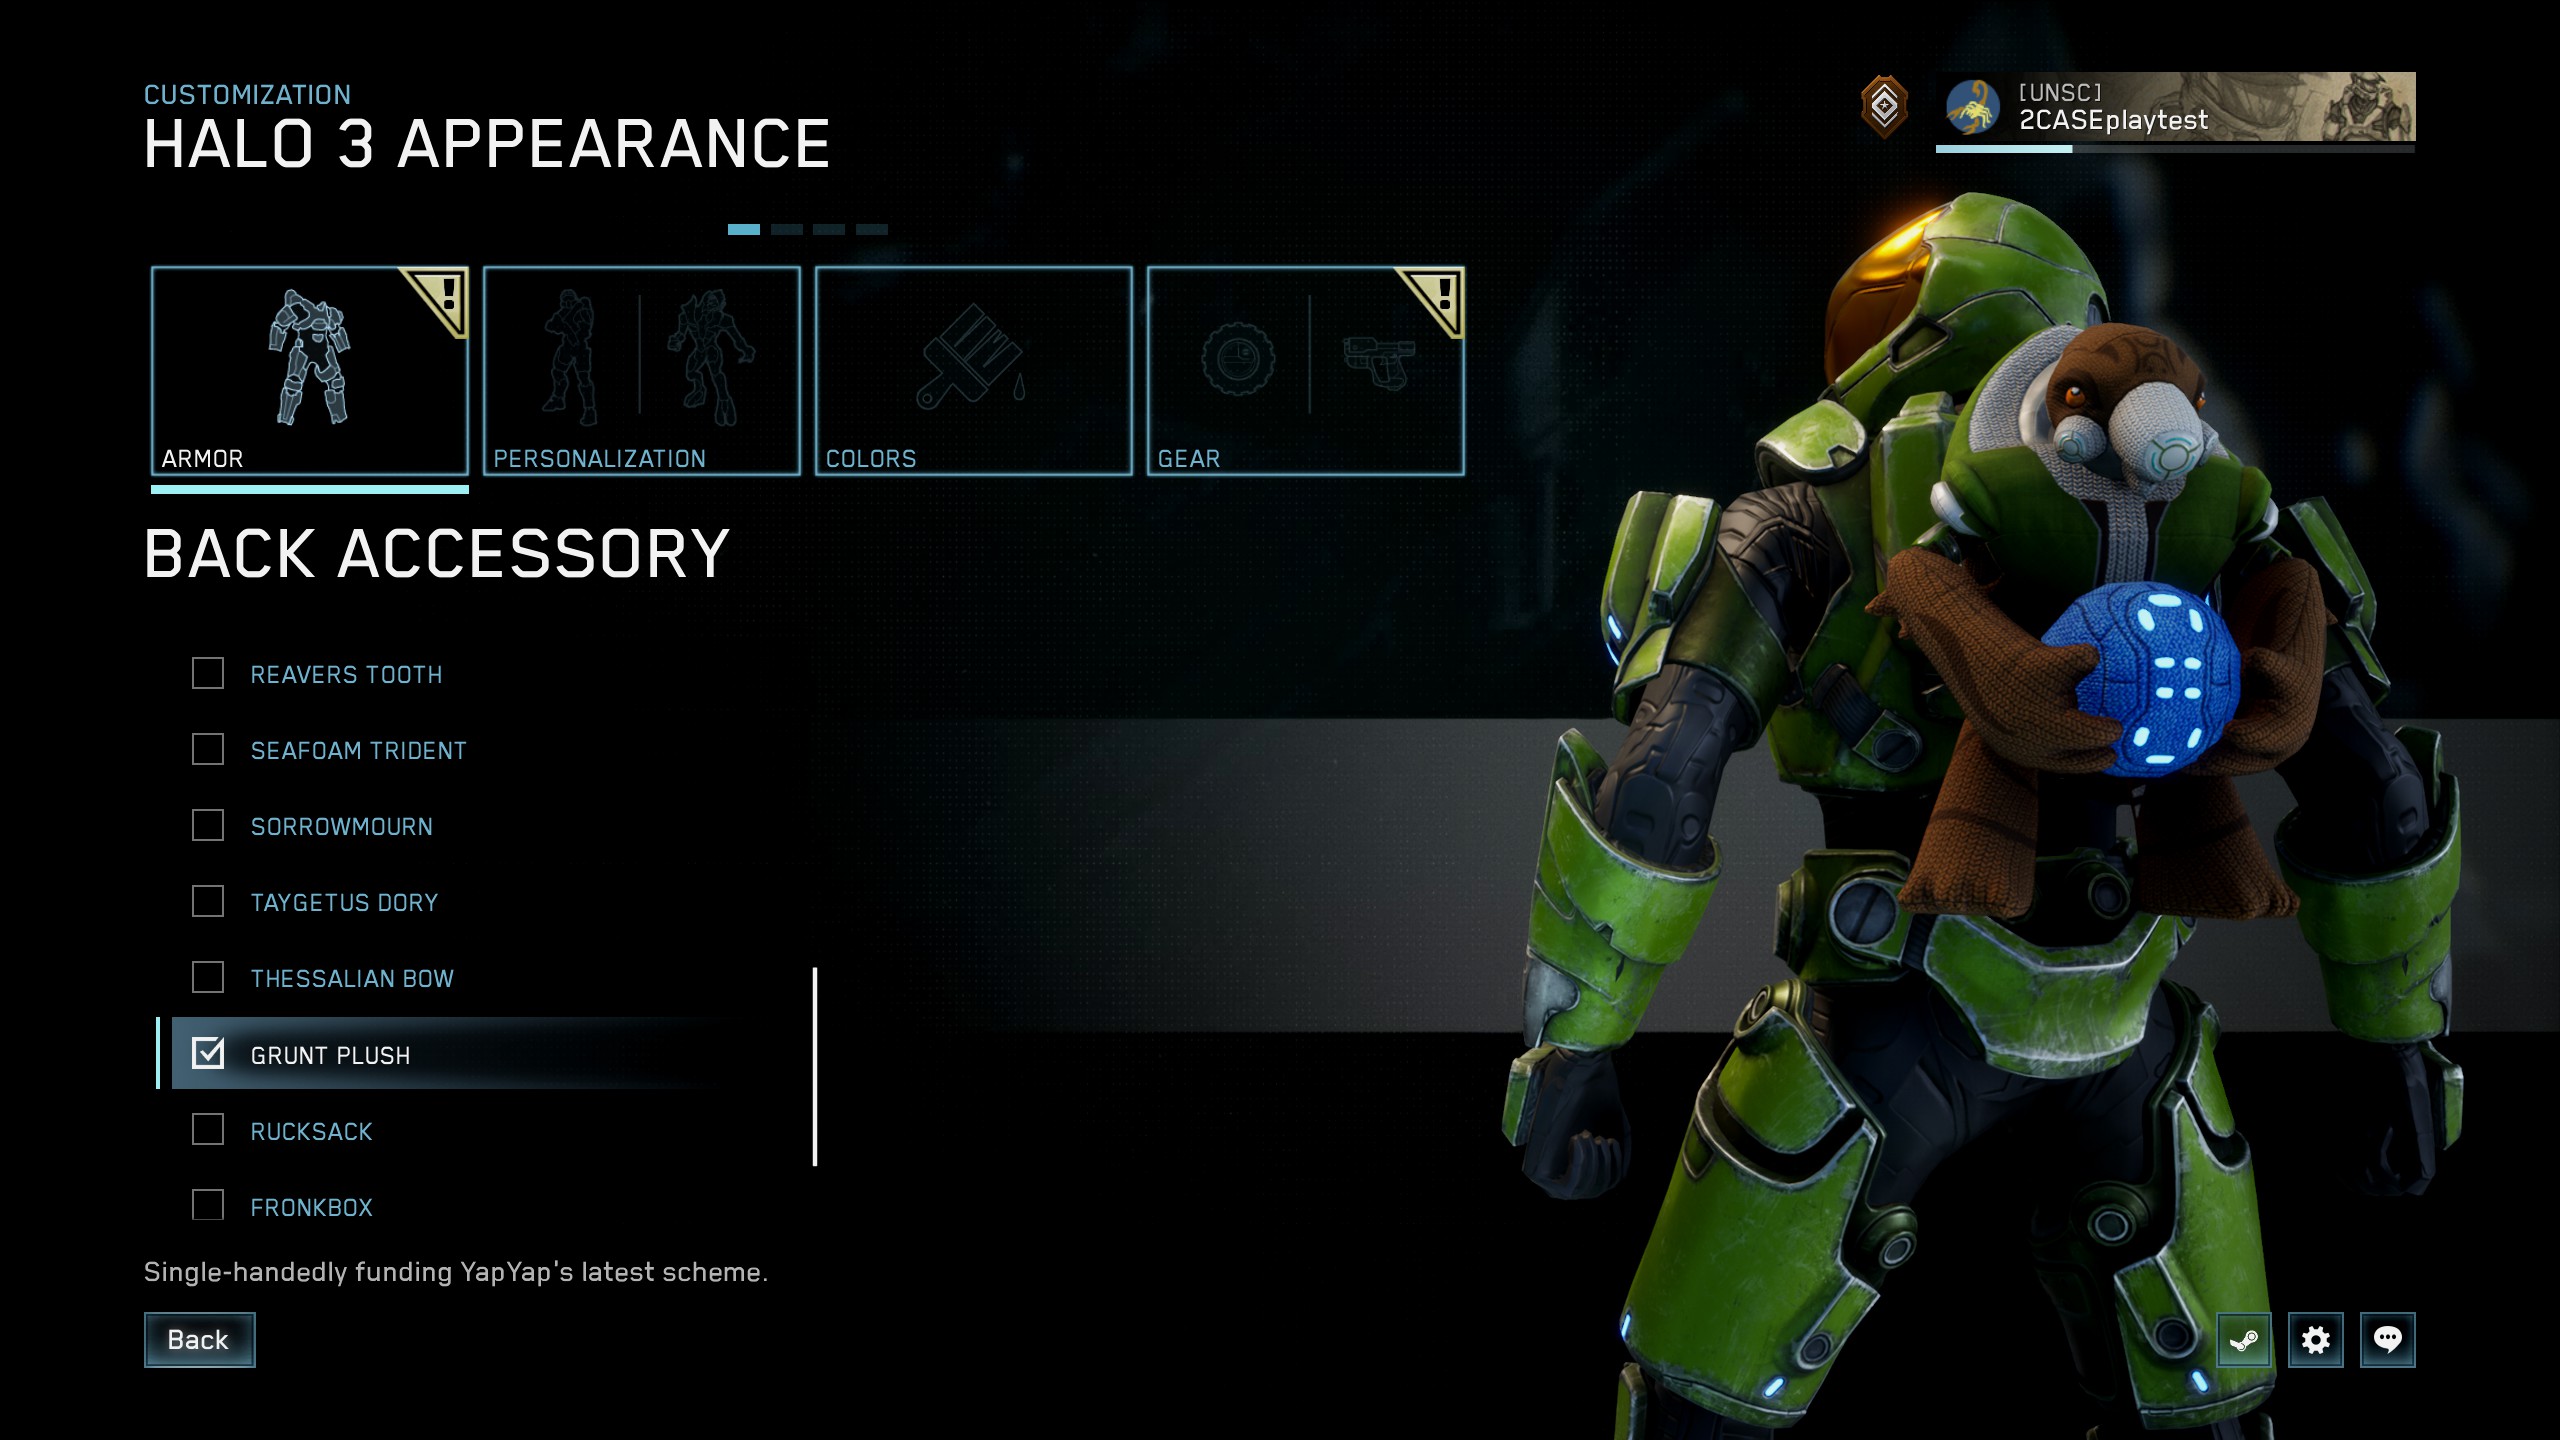 Spartan wearing a Grunt Plush as a back accessory in Halo 3